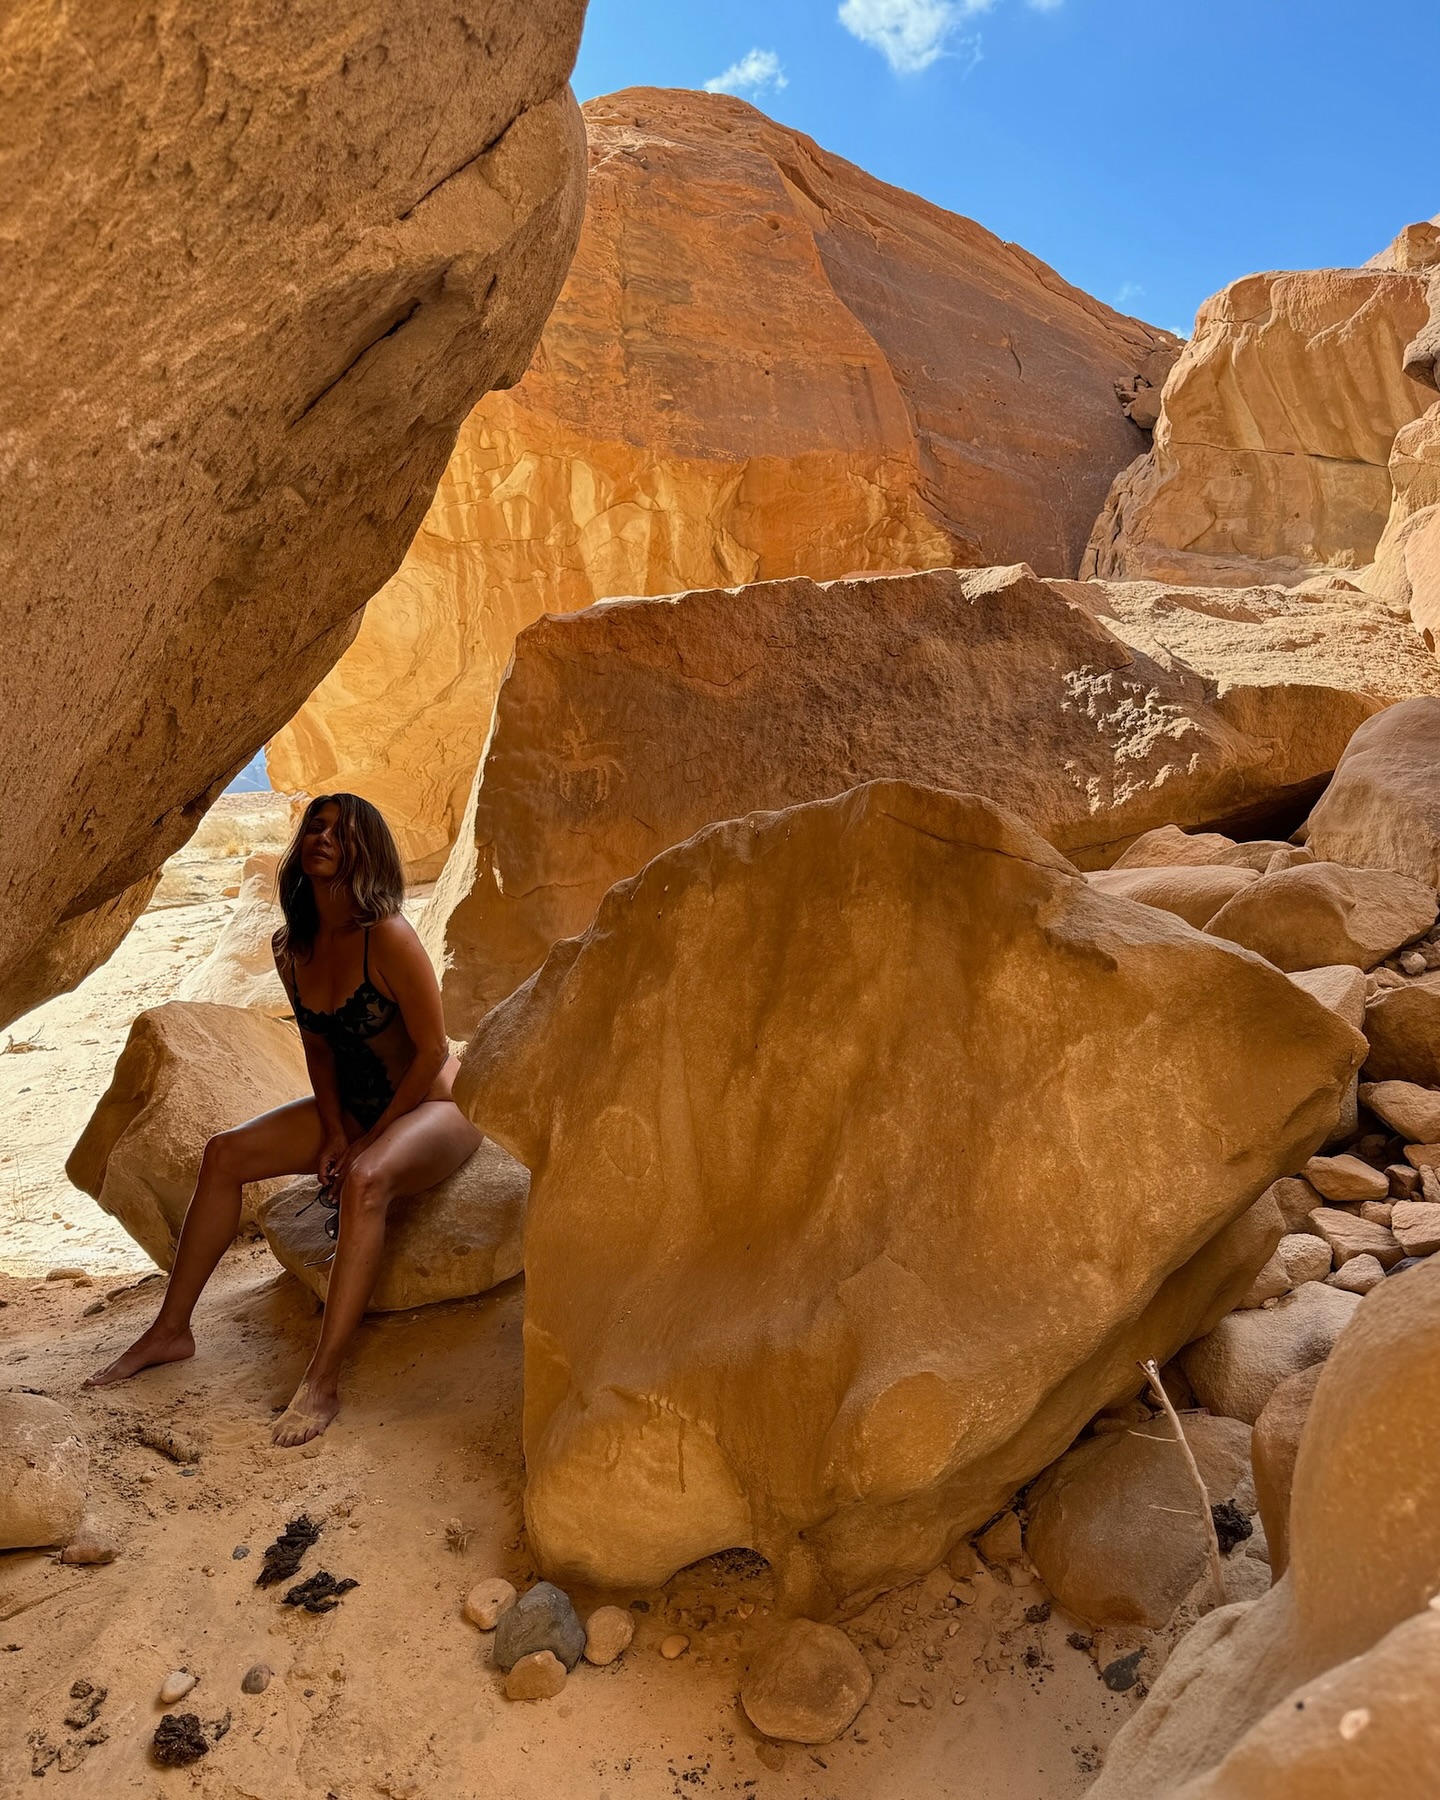 Halle modeled a lingerie piece in her desert photo